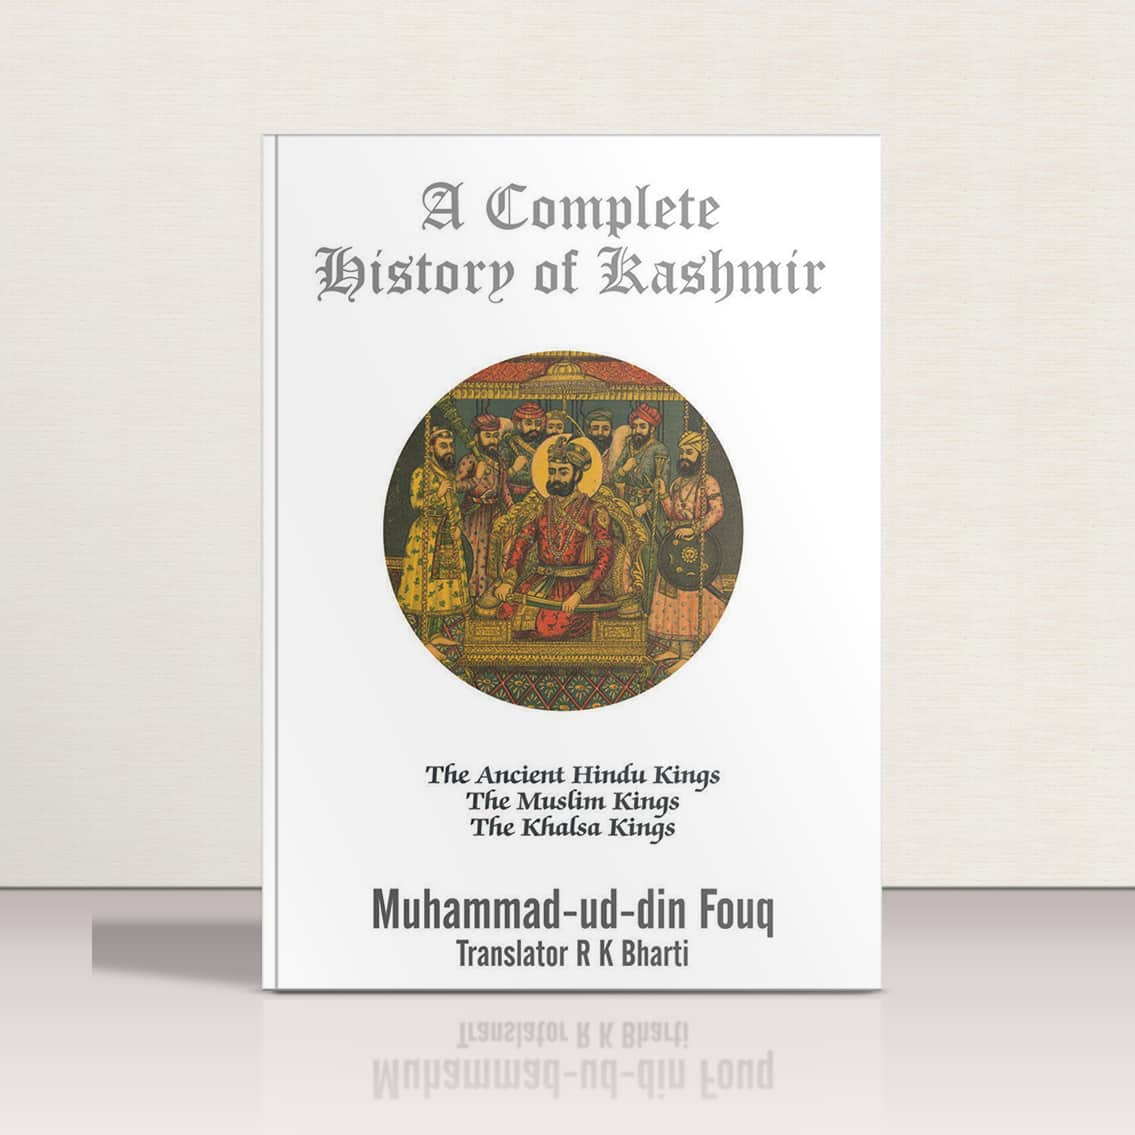 A Complete History of Kashmir by Muhammad-ud-din Fouq